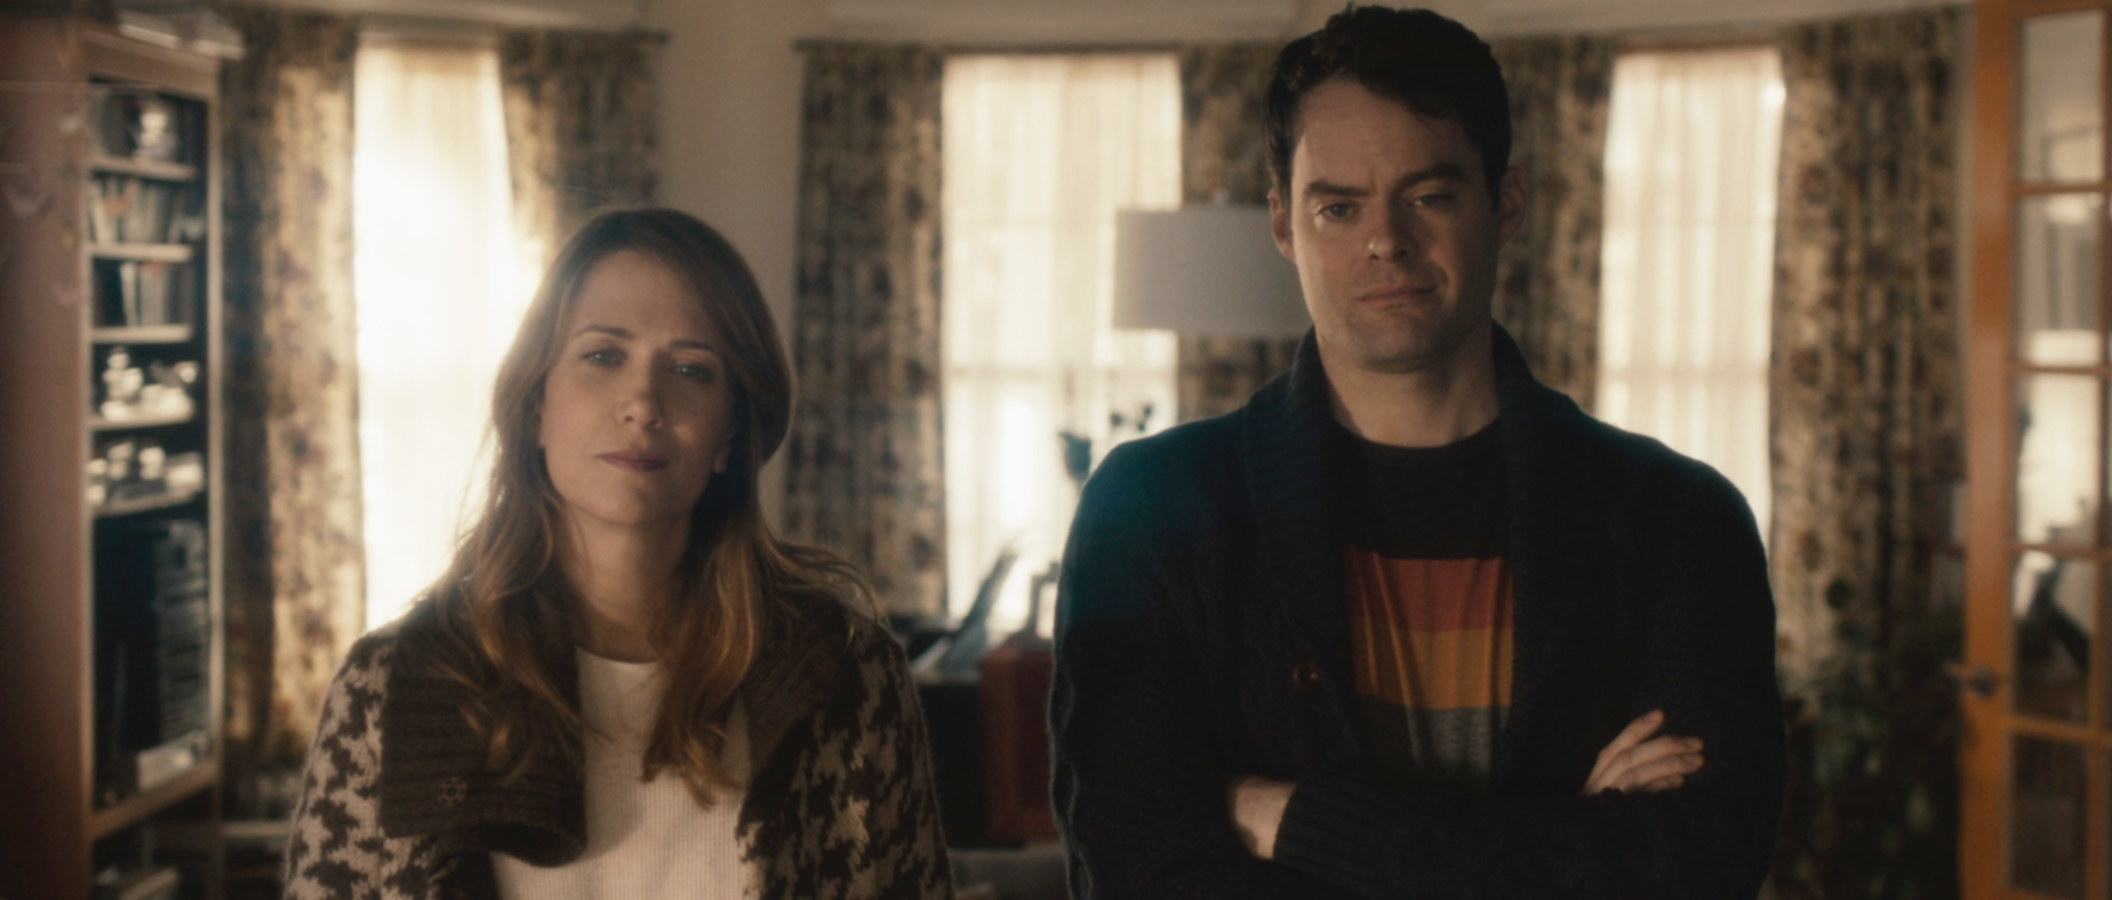 Kristen Wiig and Bill Hader stare at something off screen with their arms crossed